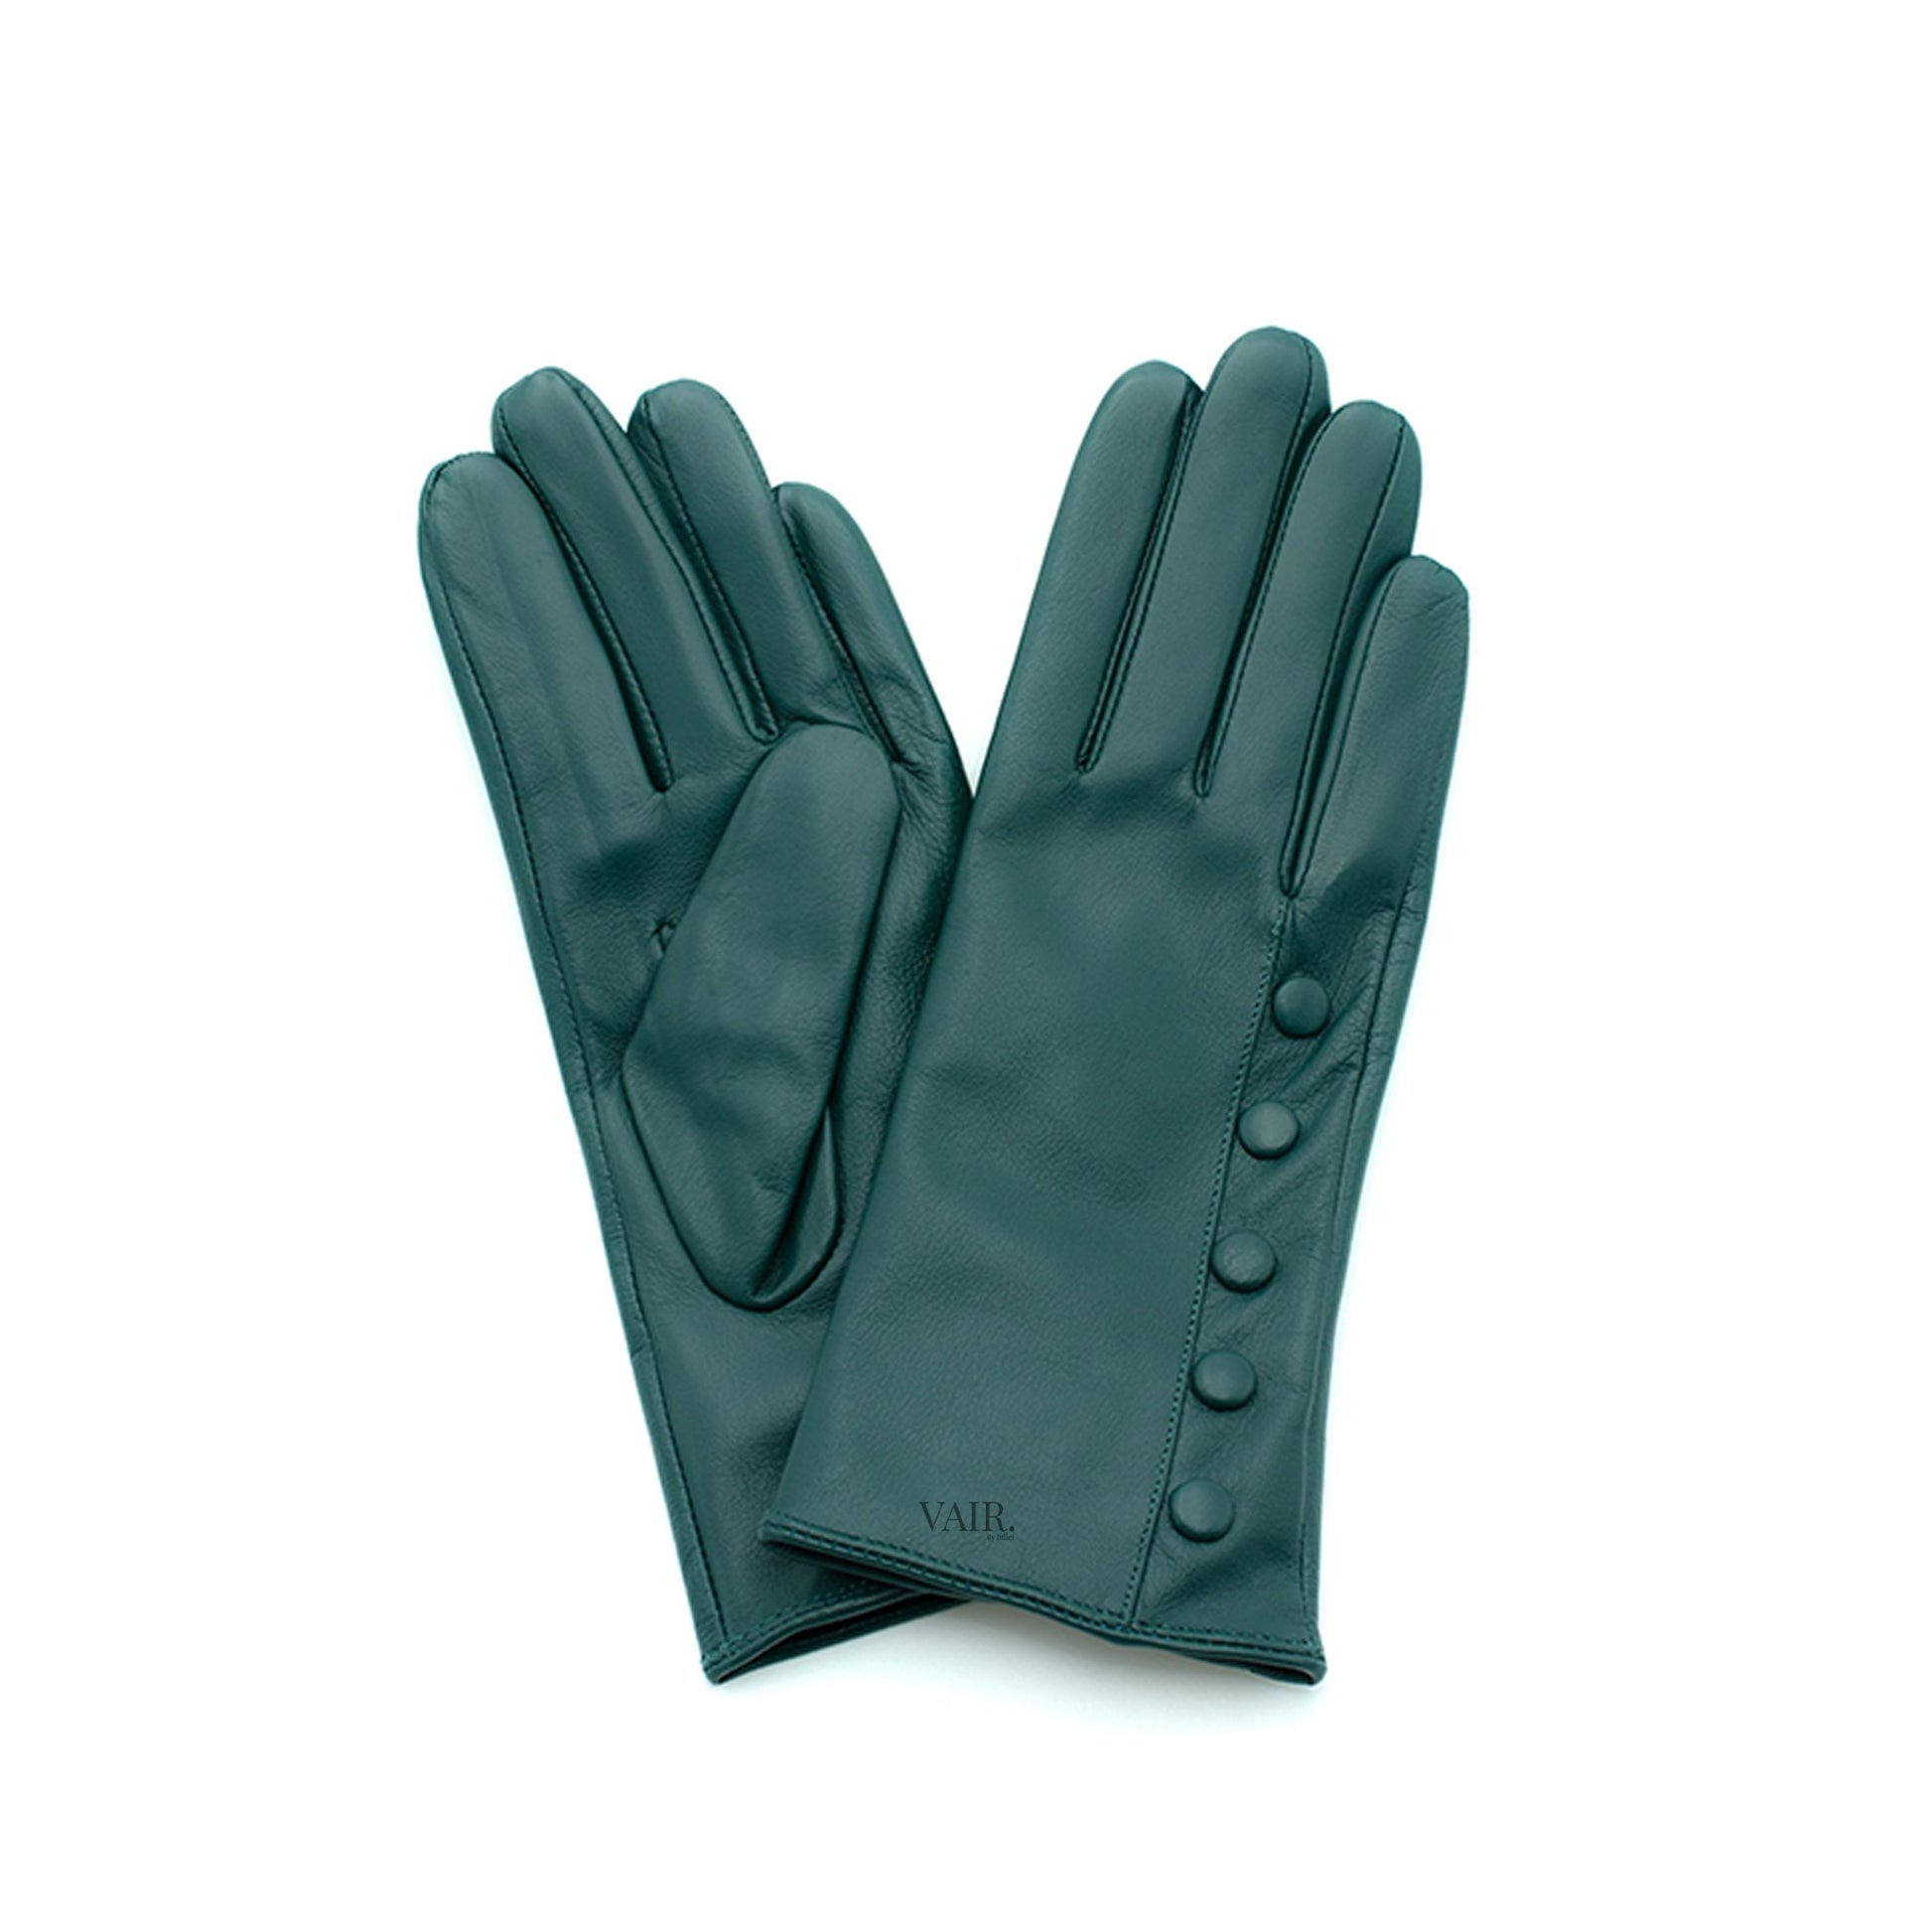 teal leather gloves with cashmere lining 